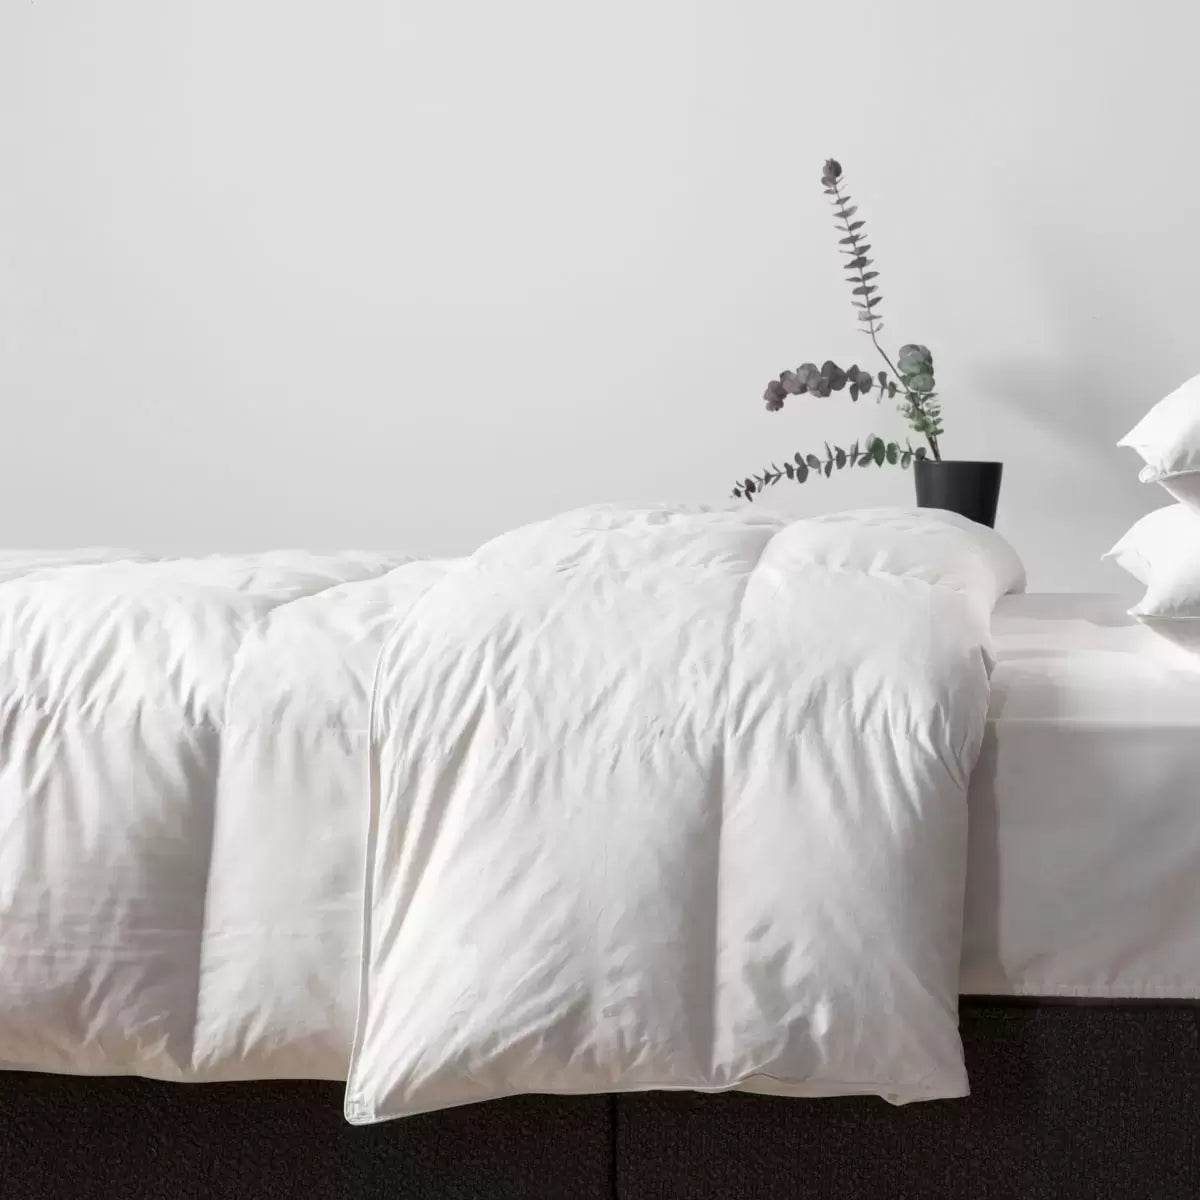 Simply Sleep White Goose Feather and Down 10.5 Tog Duvet